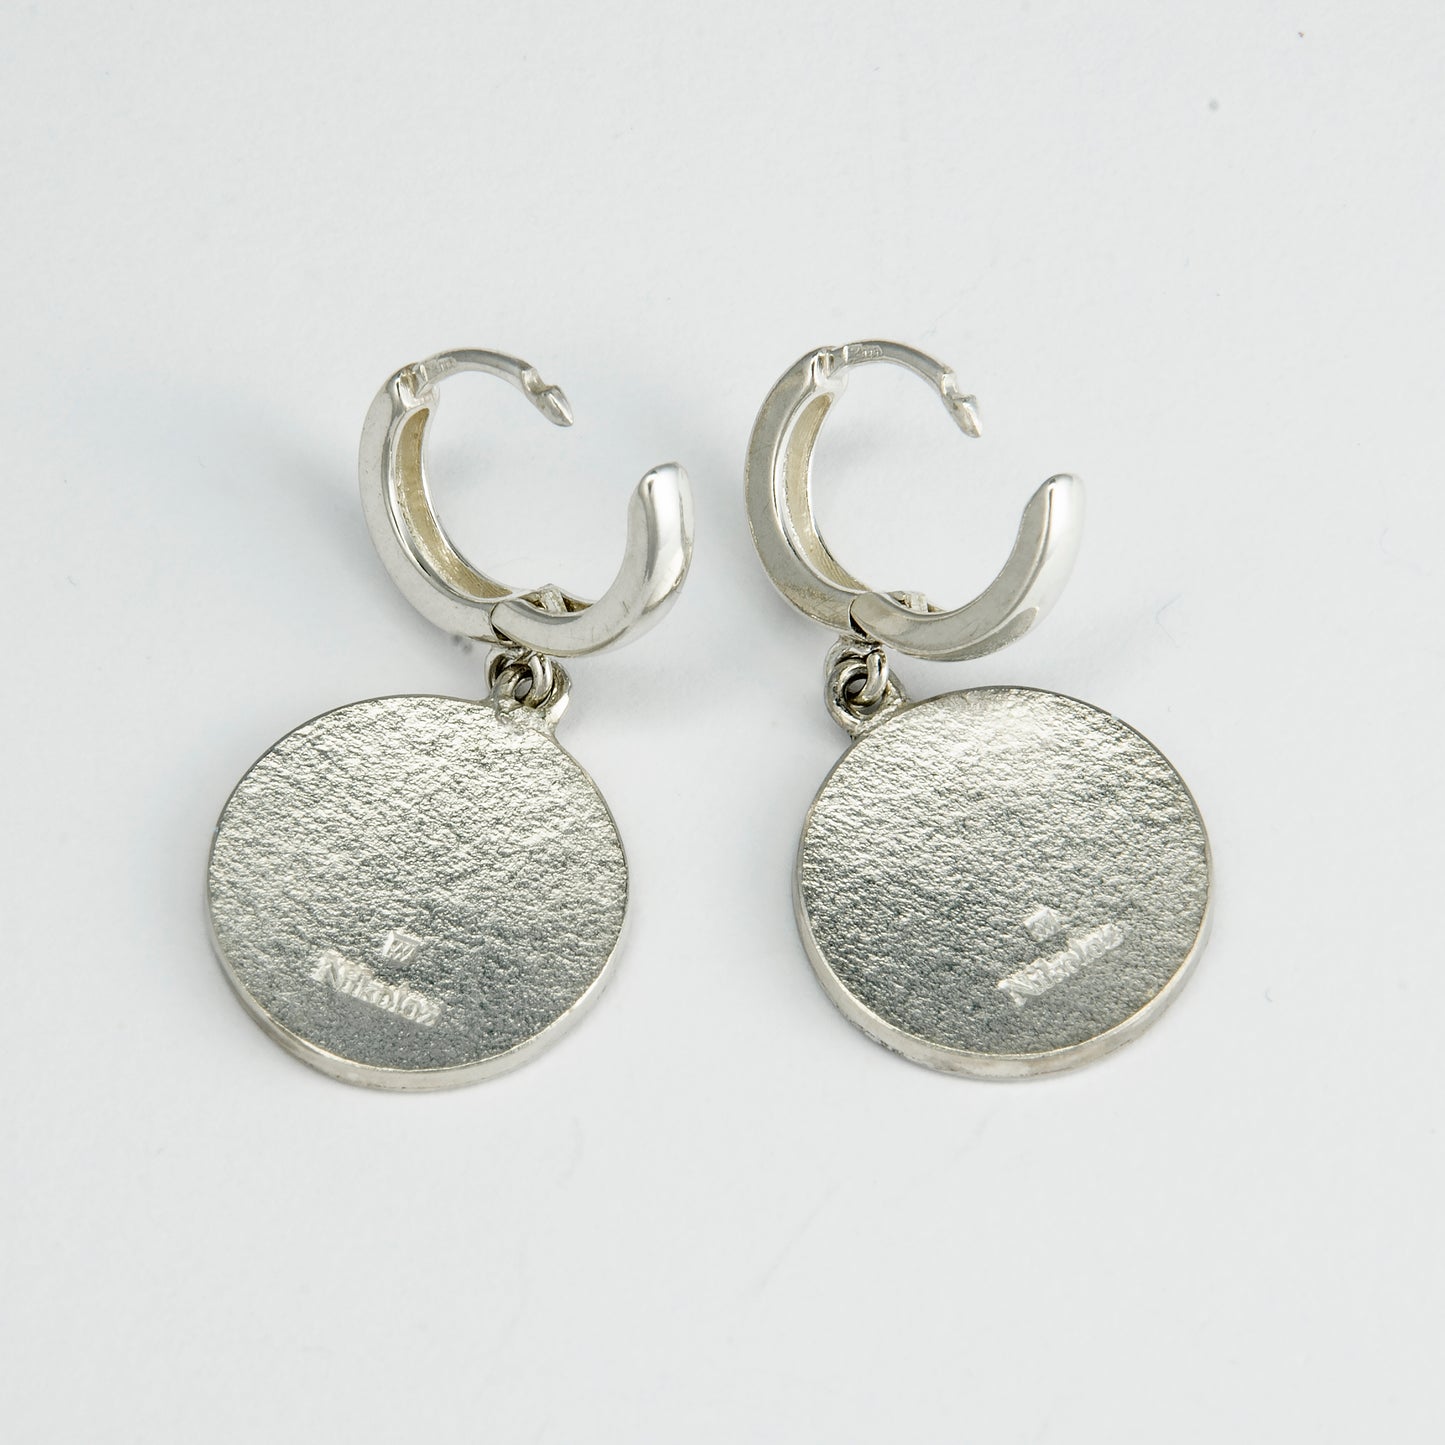 Cloisonné Enamel, Sterling Silver, Round Earrings "Snowdrops"